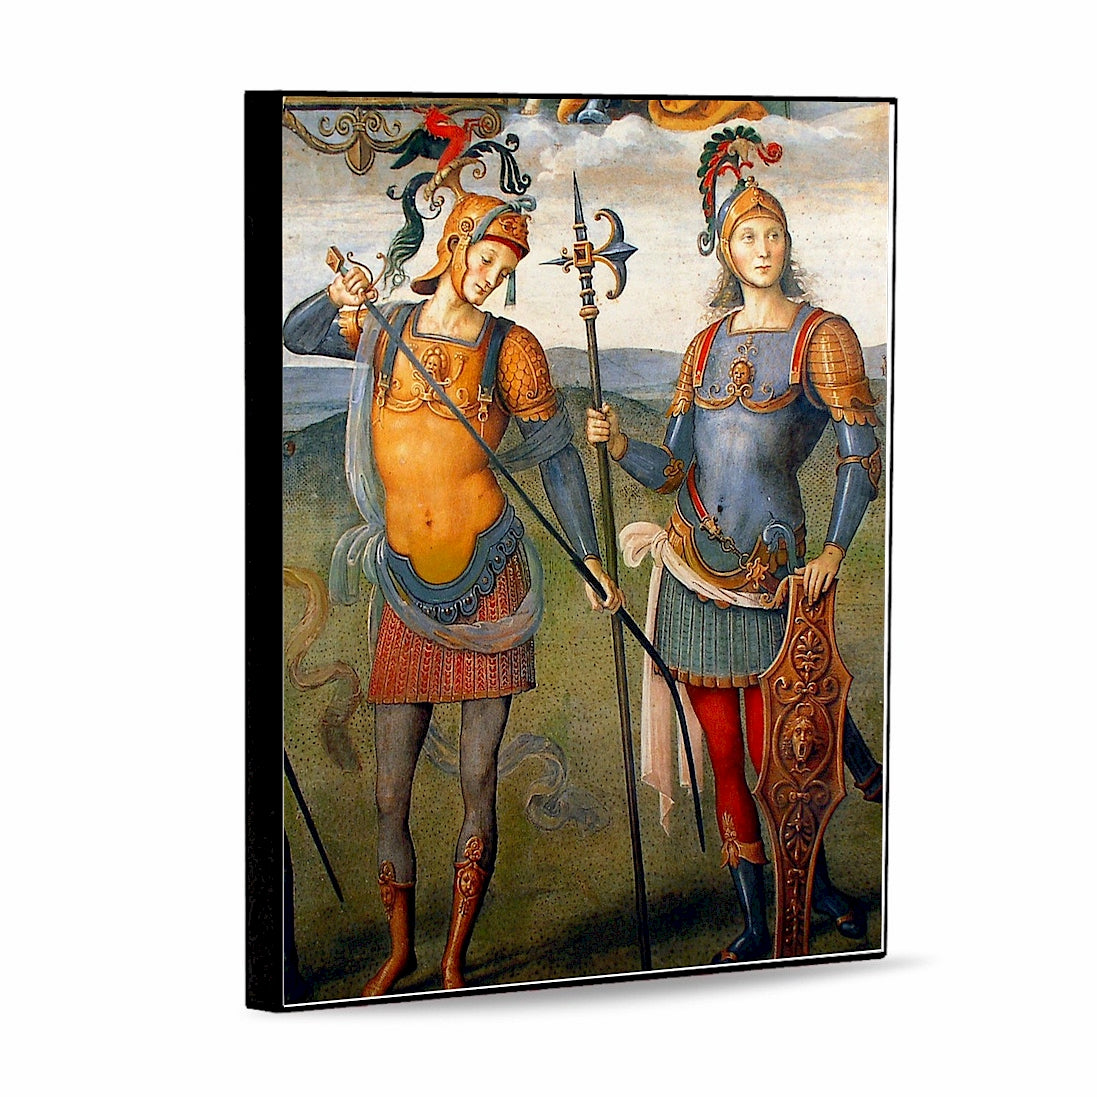 AFFRESCO: Panel Tile - Opera Fortitude and Temperance with Six Antique Heroes Fresco by Pietro Perugino (8x10)